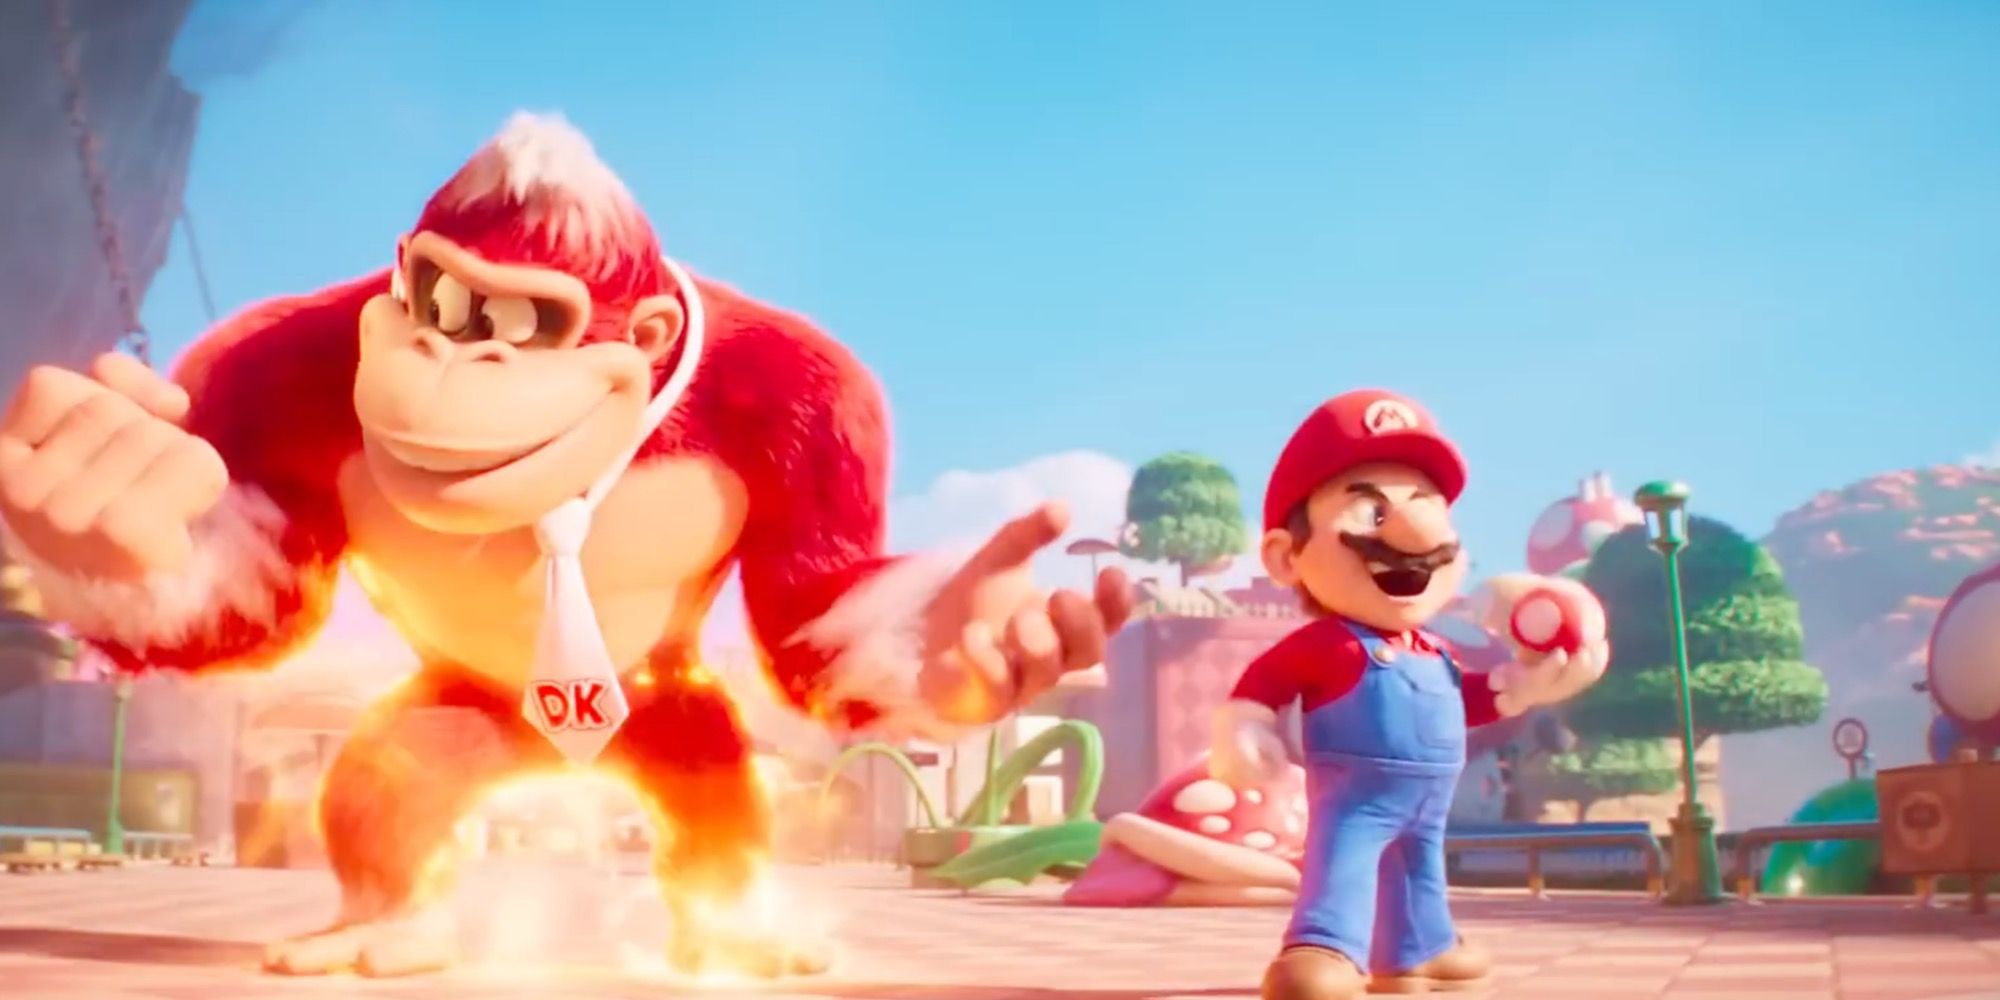 Donkey Kong and Mario in The Super Mario Bros. Movie